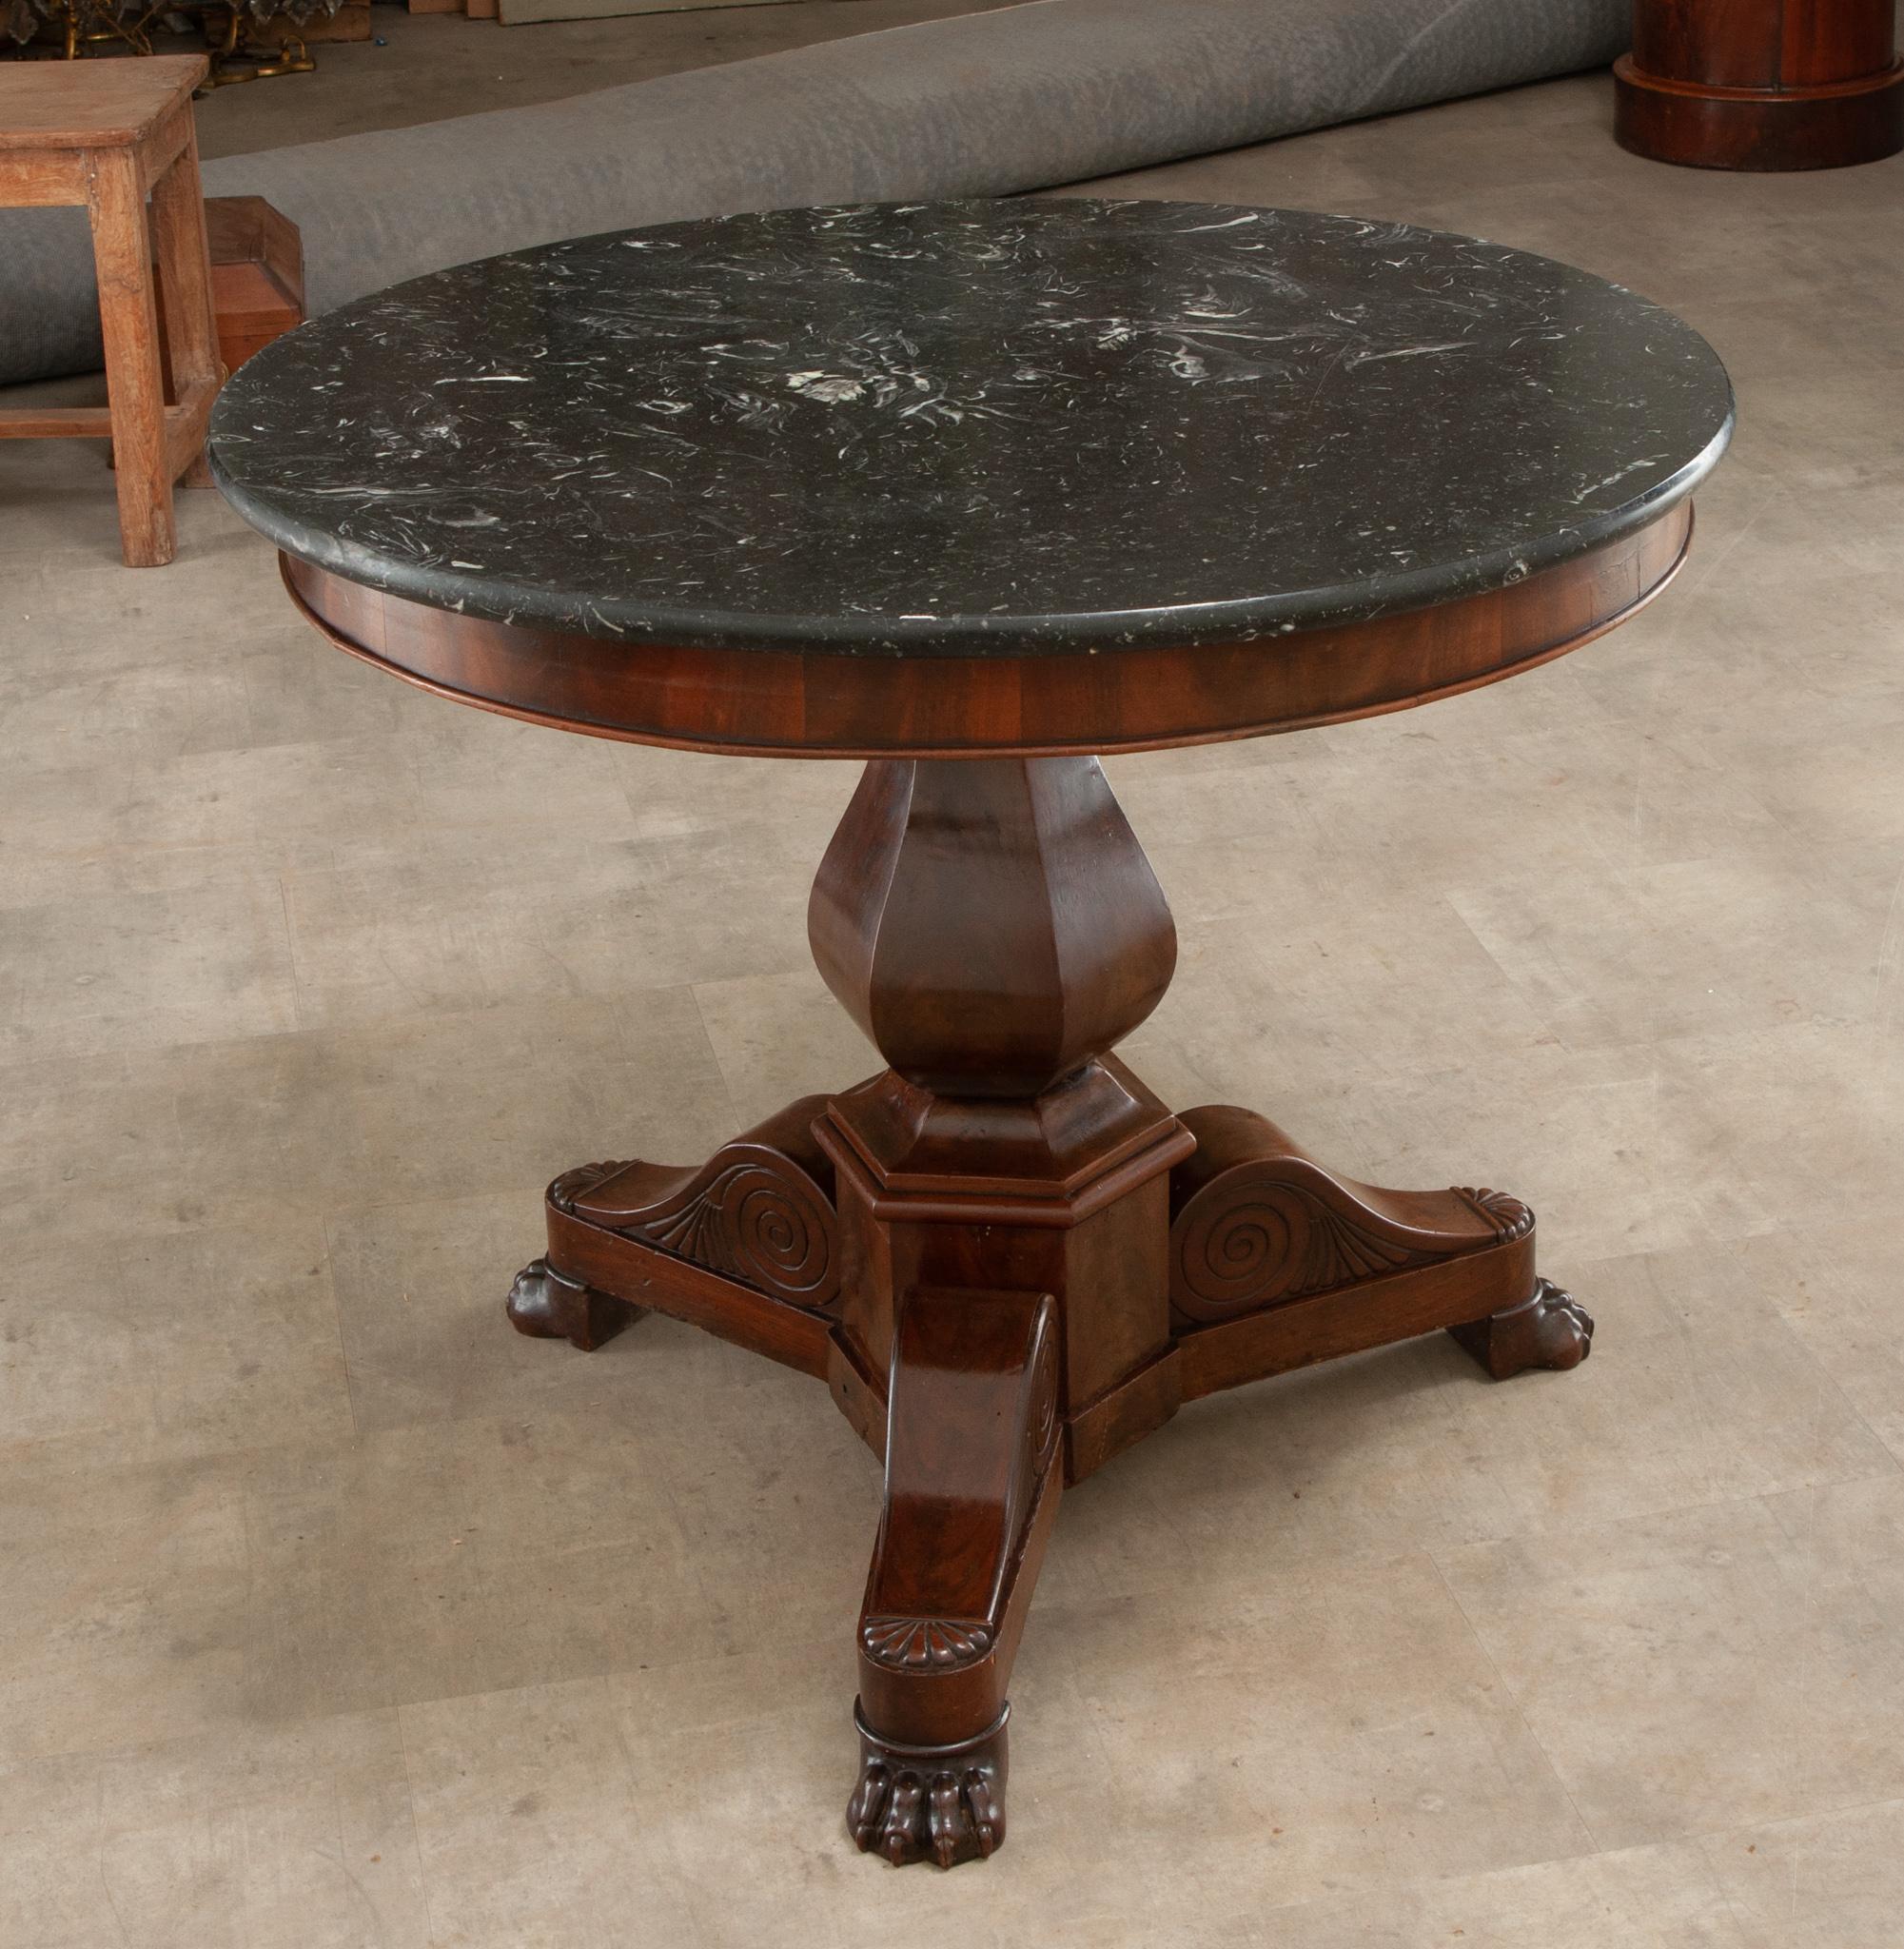 A French marble top gueridon from the Restauration period. This round table is topped with a black fossil marble with a carved lip. Below is a detailed mahogany pedestal base with scroll legs ending in paw feet. Cleaned and polished with a French